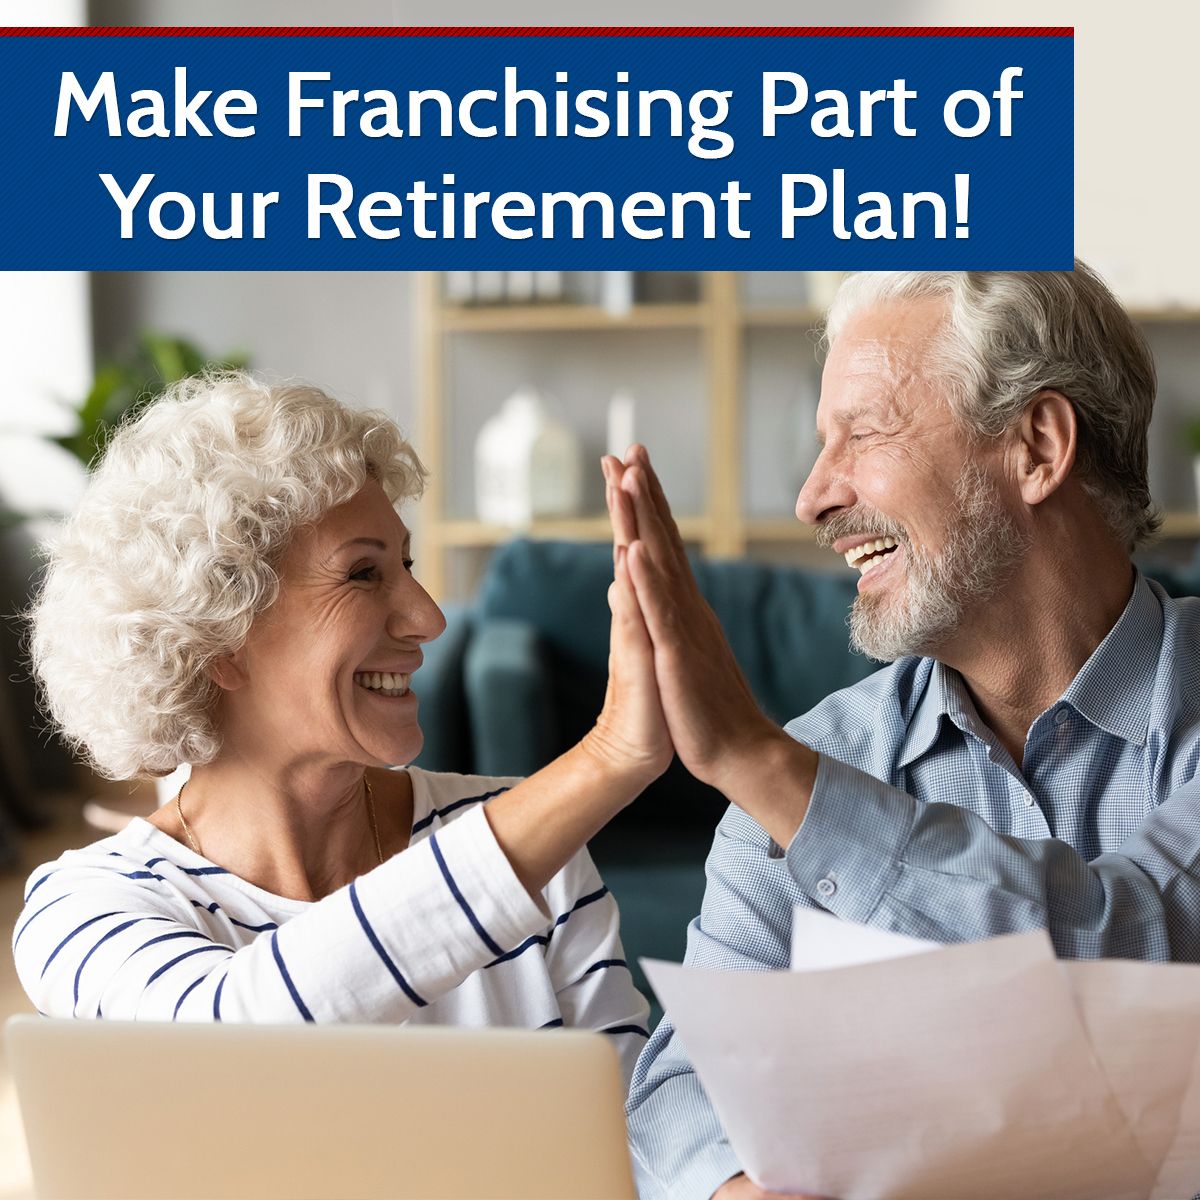 Make Franchising Part of Your Retirement Plan!